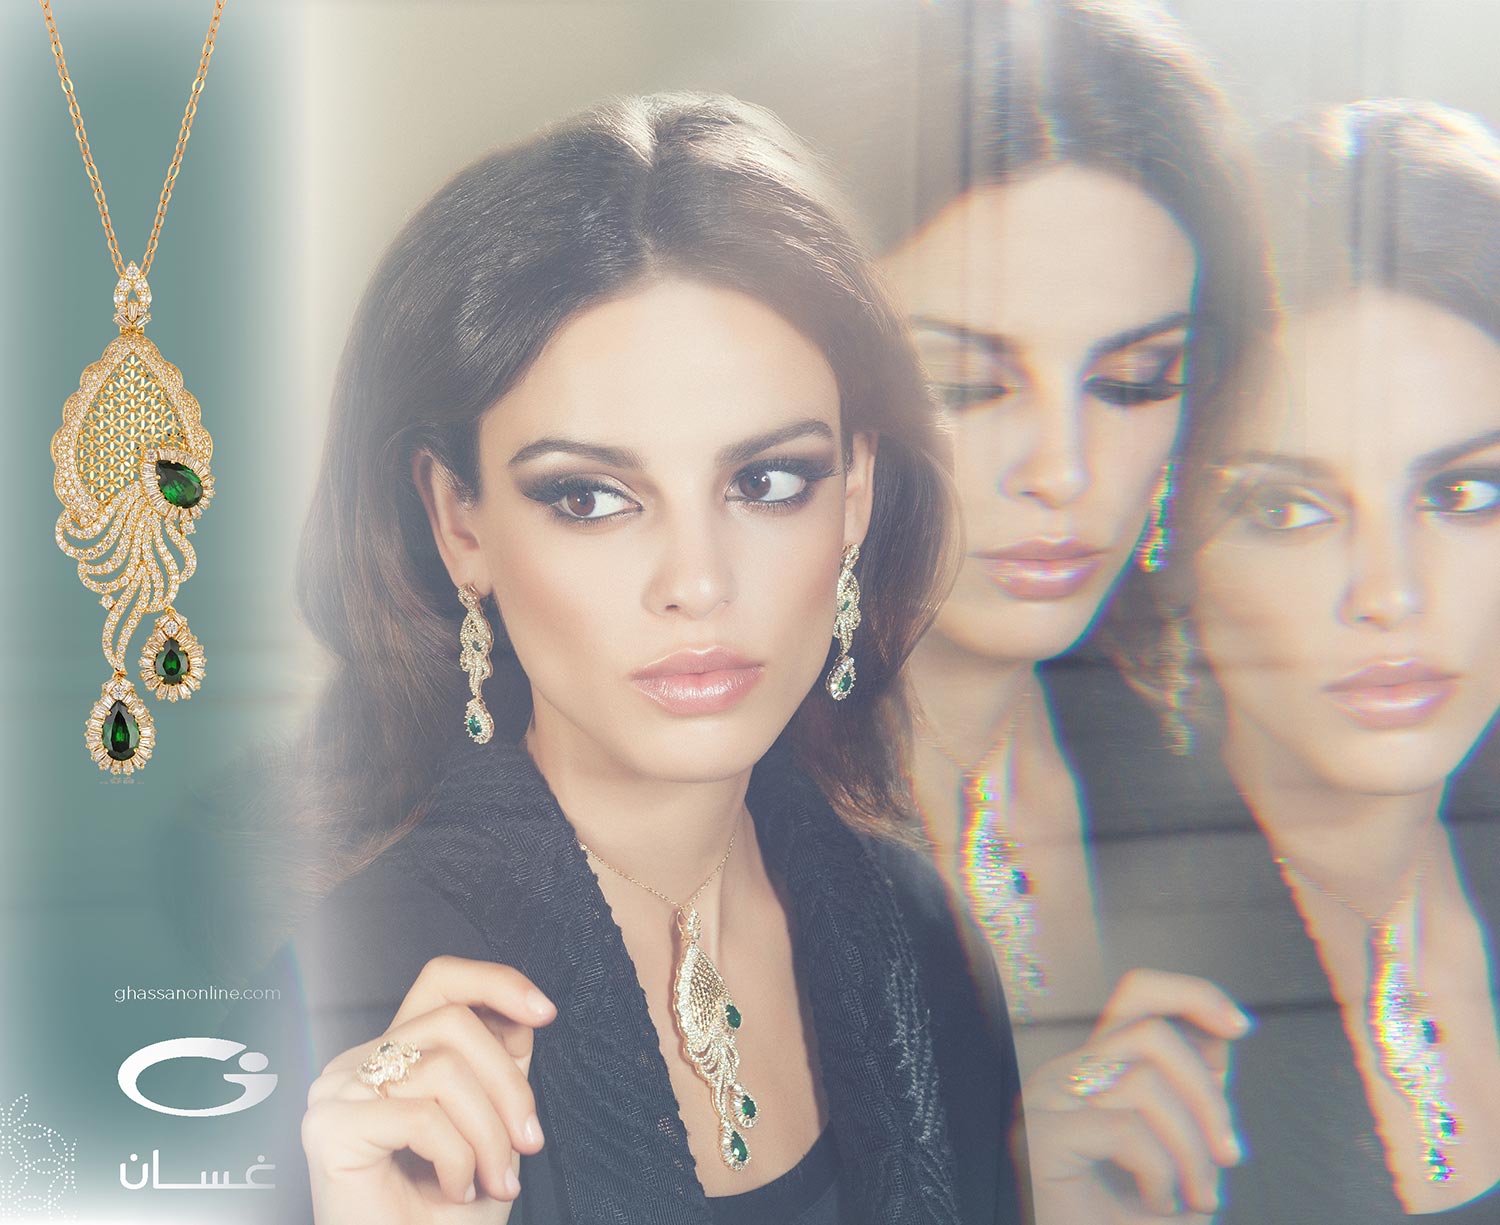 Ghassan Jewellery Campaign